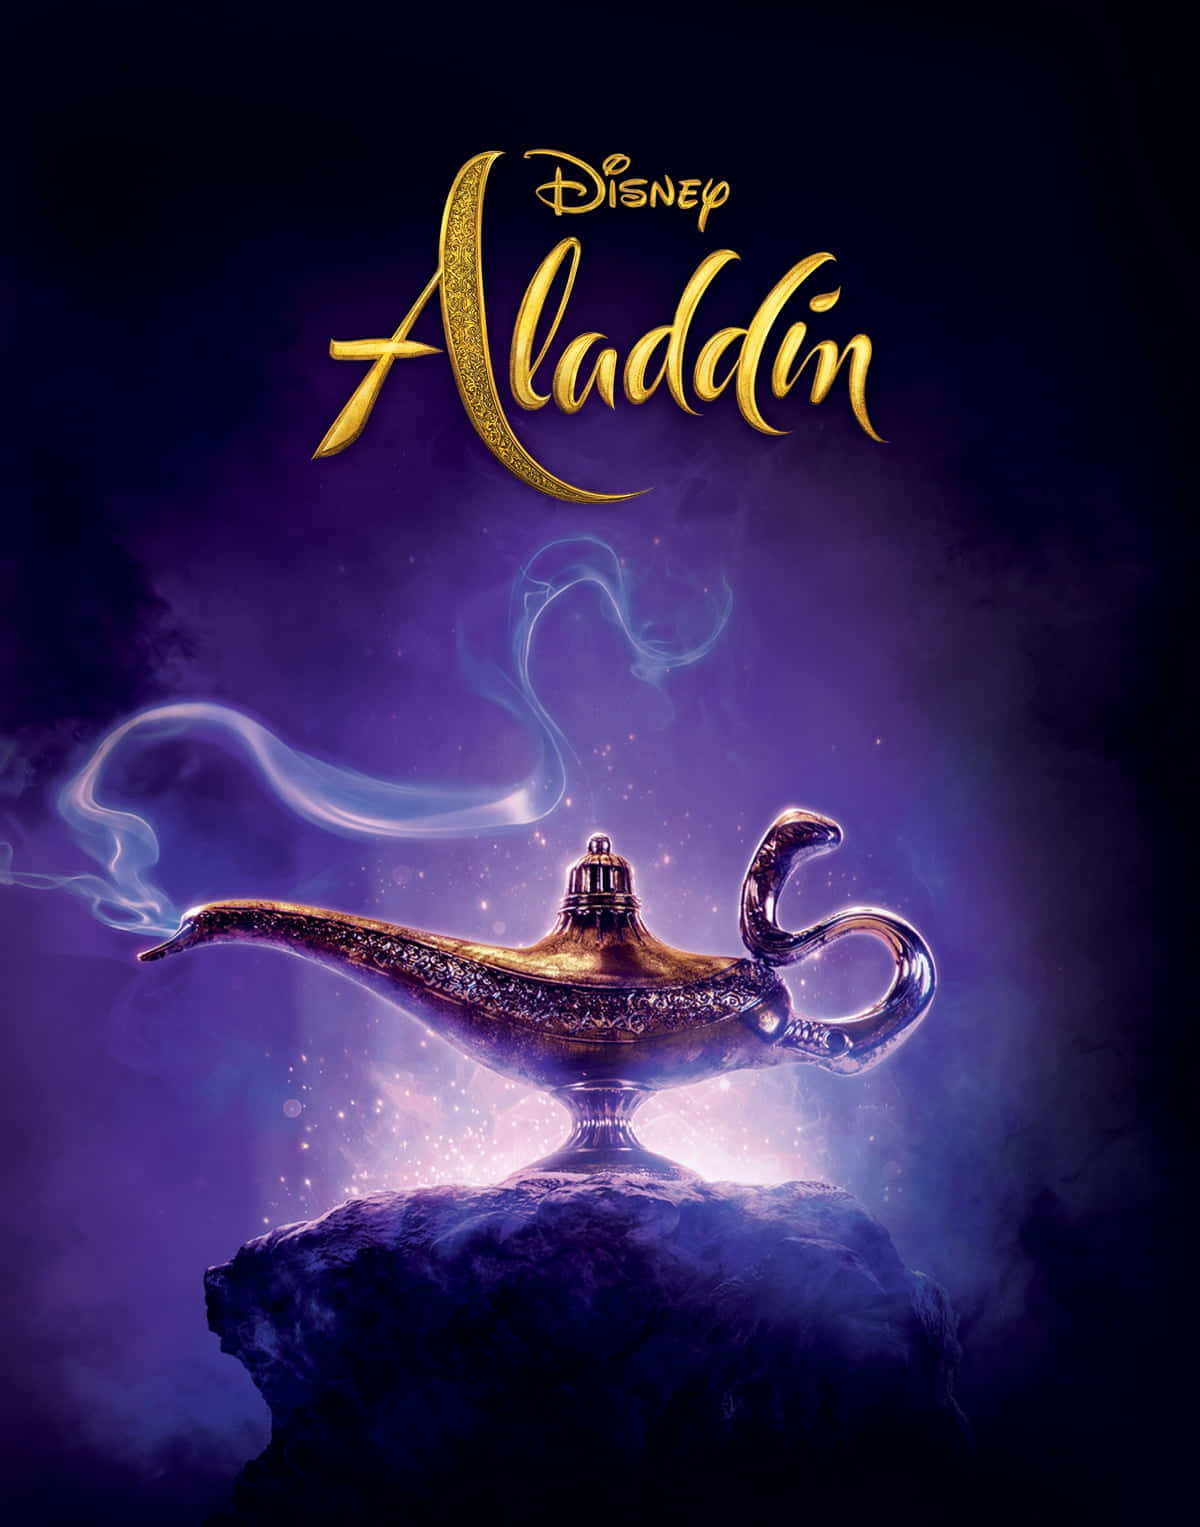 Witness the power of the magic lamp as Aladdin invokes the Genie!